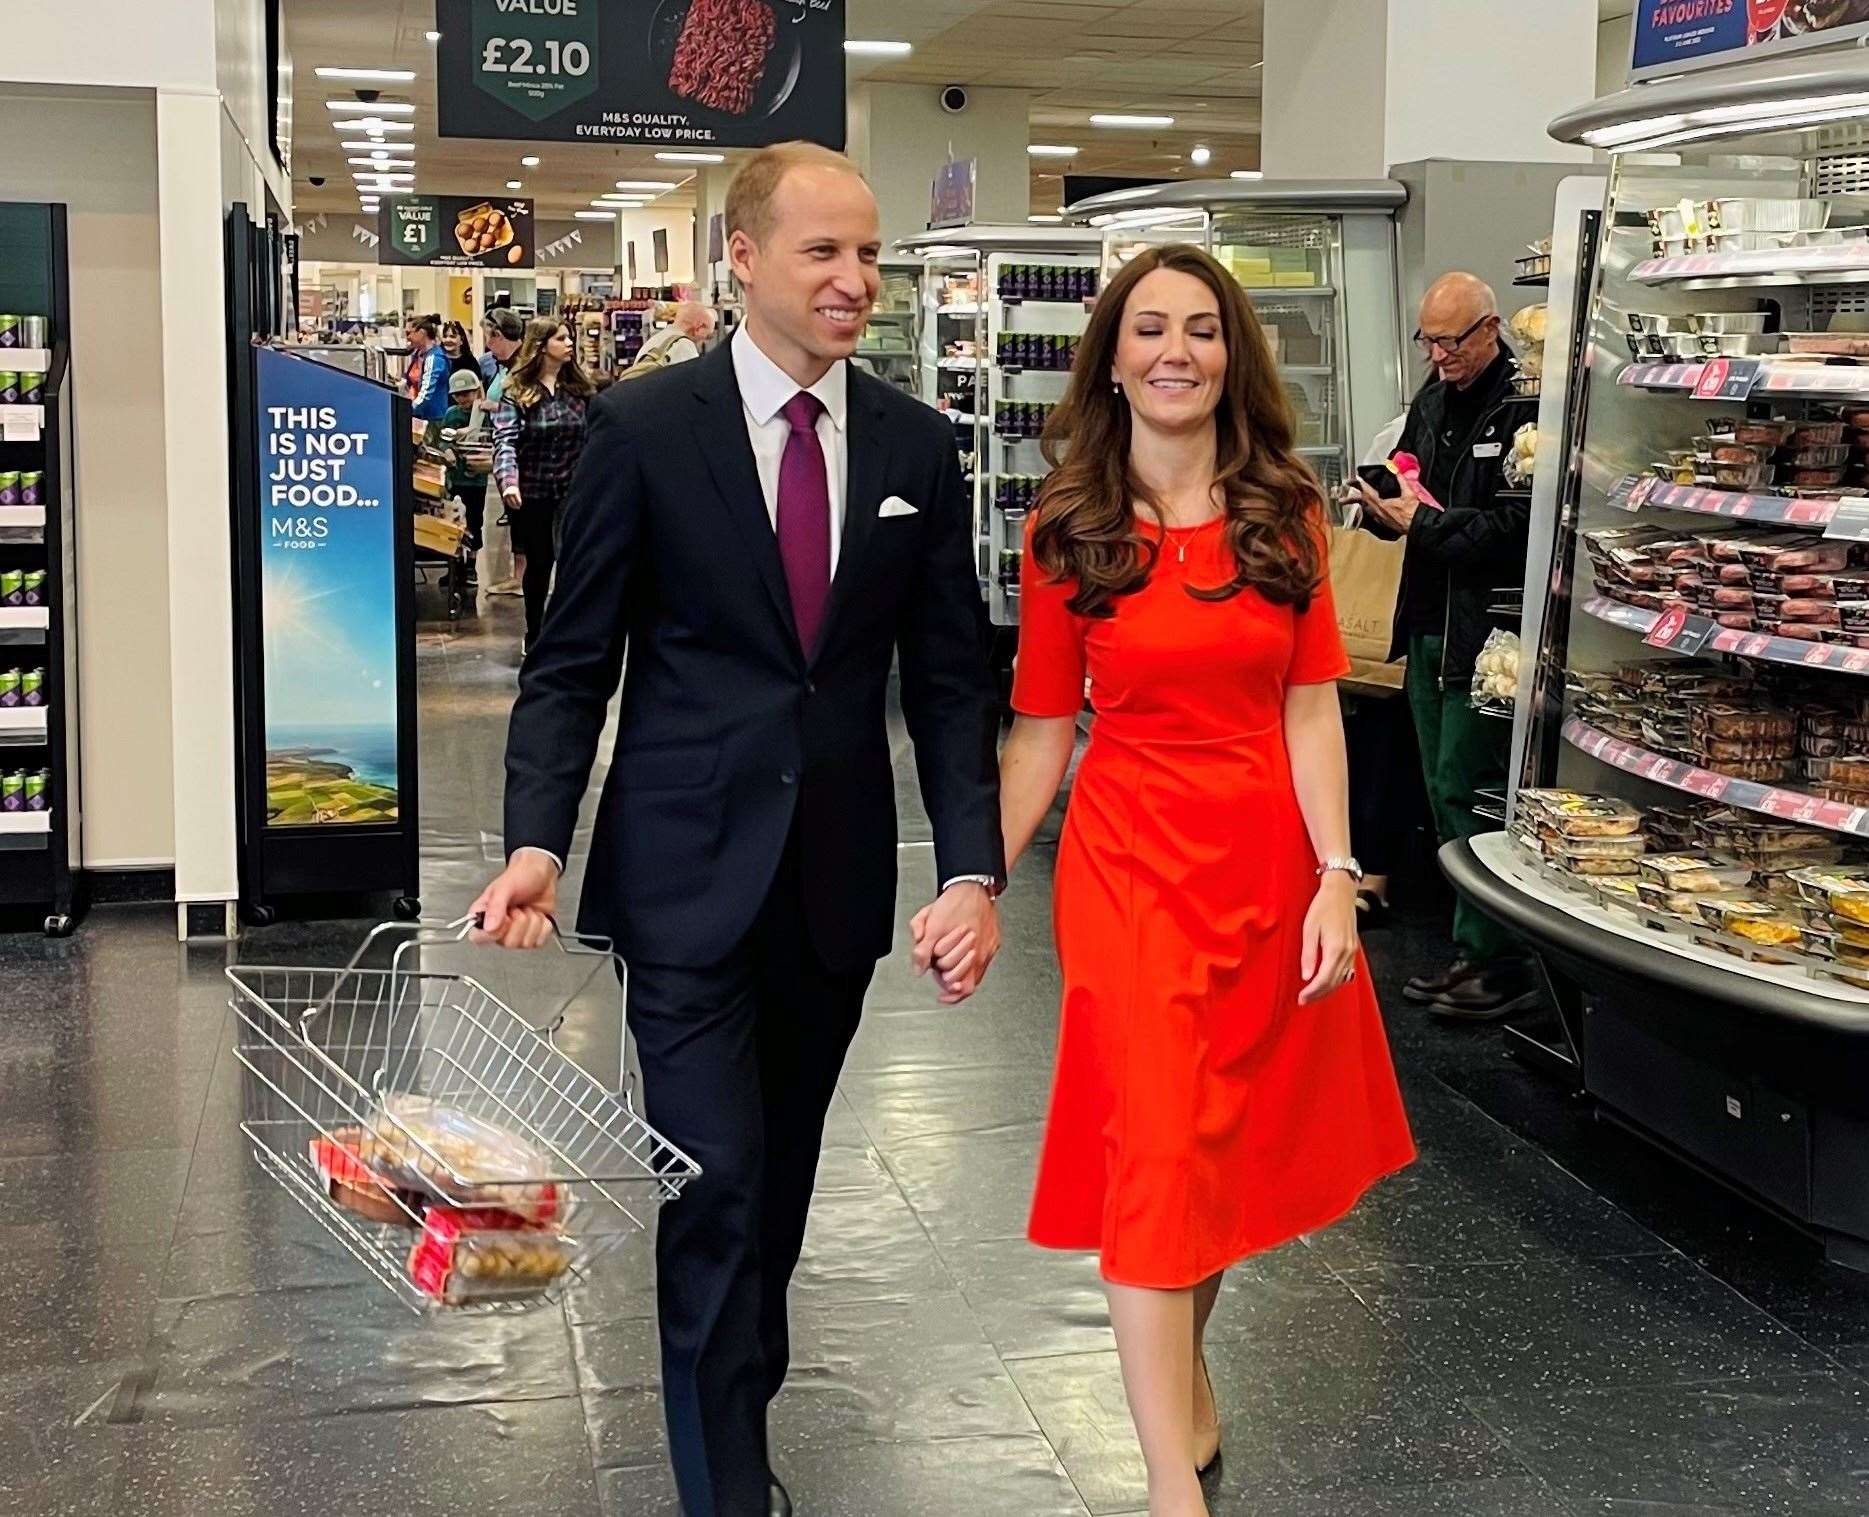 'Kate Middleton and Prince William' paid a visit to M&S in Canterbury for the Platinum Jubilee celebrations for the Queen. Picture: Whitefriars